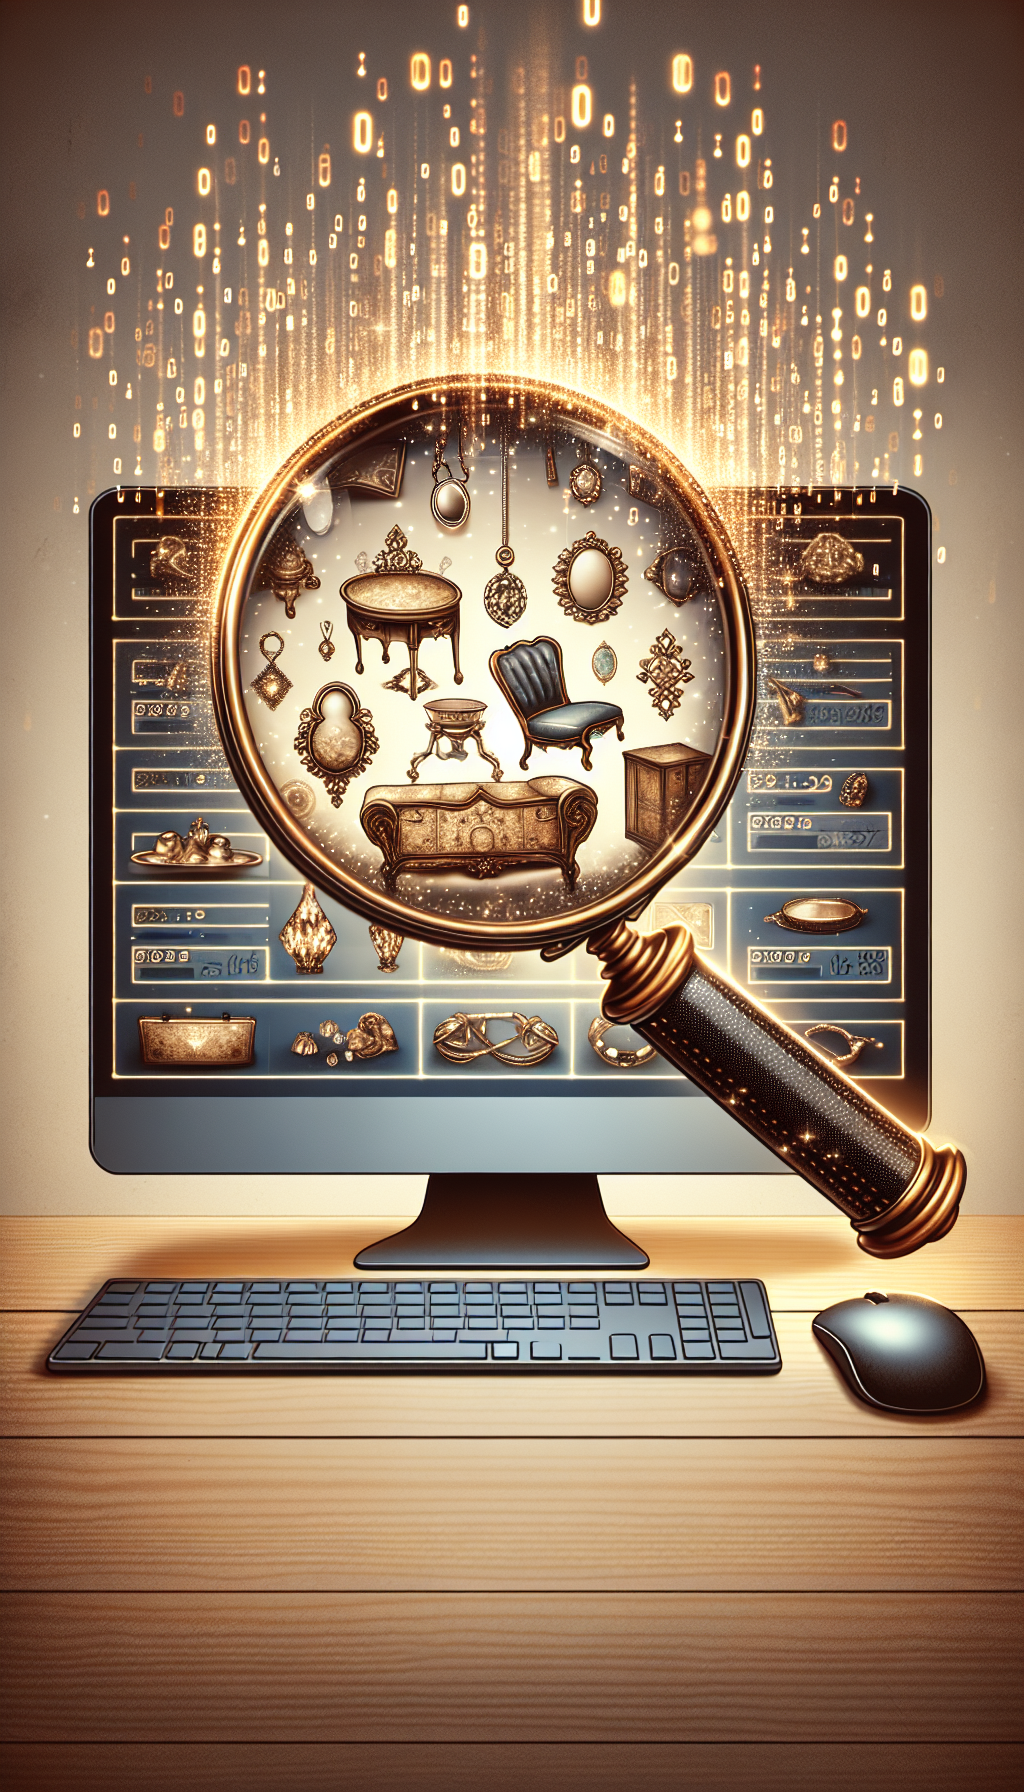 A vintage magnifying glass hovers over a computer screen displaying a gallery of antique items, with shimmering digital appraisal values floating upward. The classic and cyber elements are intertwined, symbolizing the blend of past and present in online antique appraisals. The style alternates between crisp digital vectors for the screen and soft sepia-toned watercolors for the antiques.